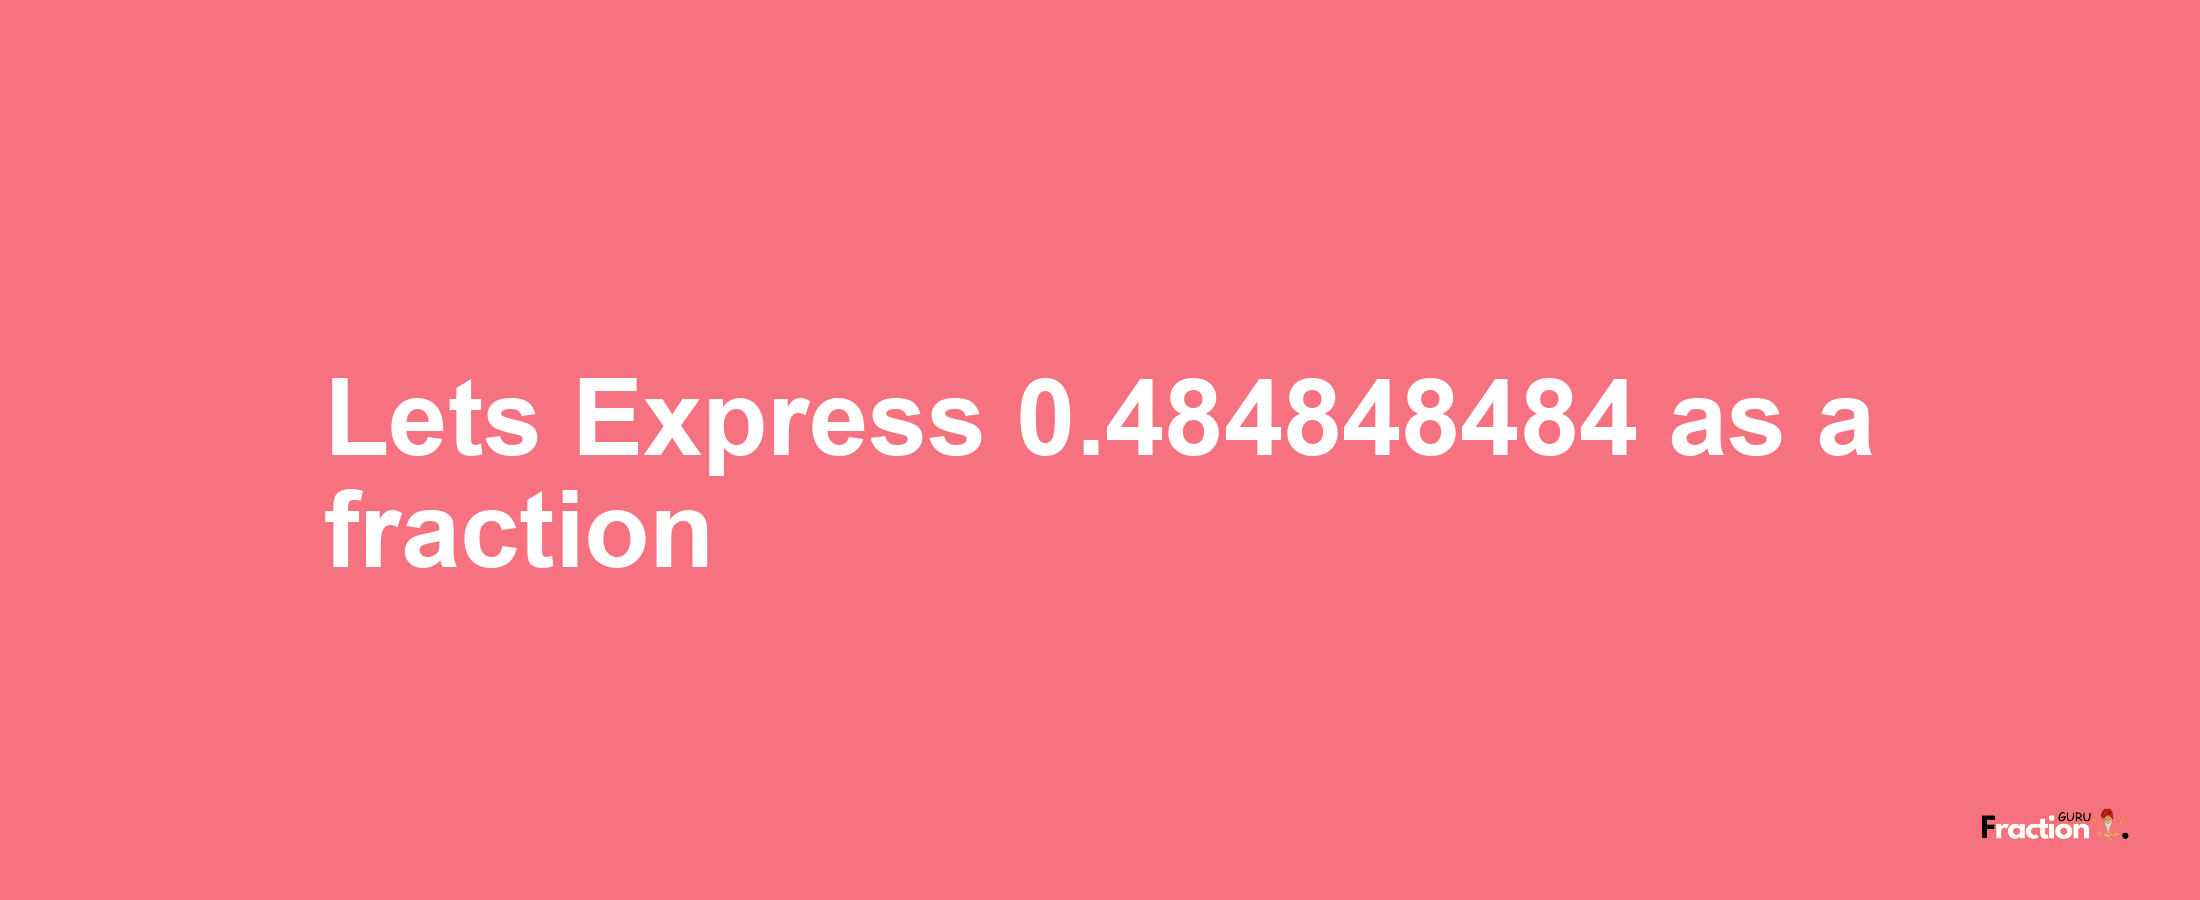 Lets Express 0.484848484 as afraction